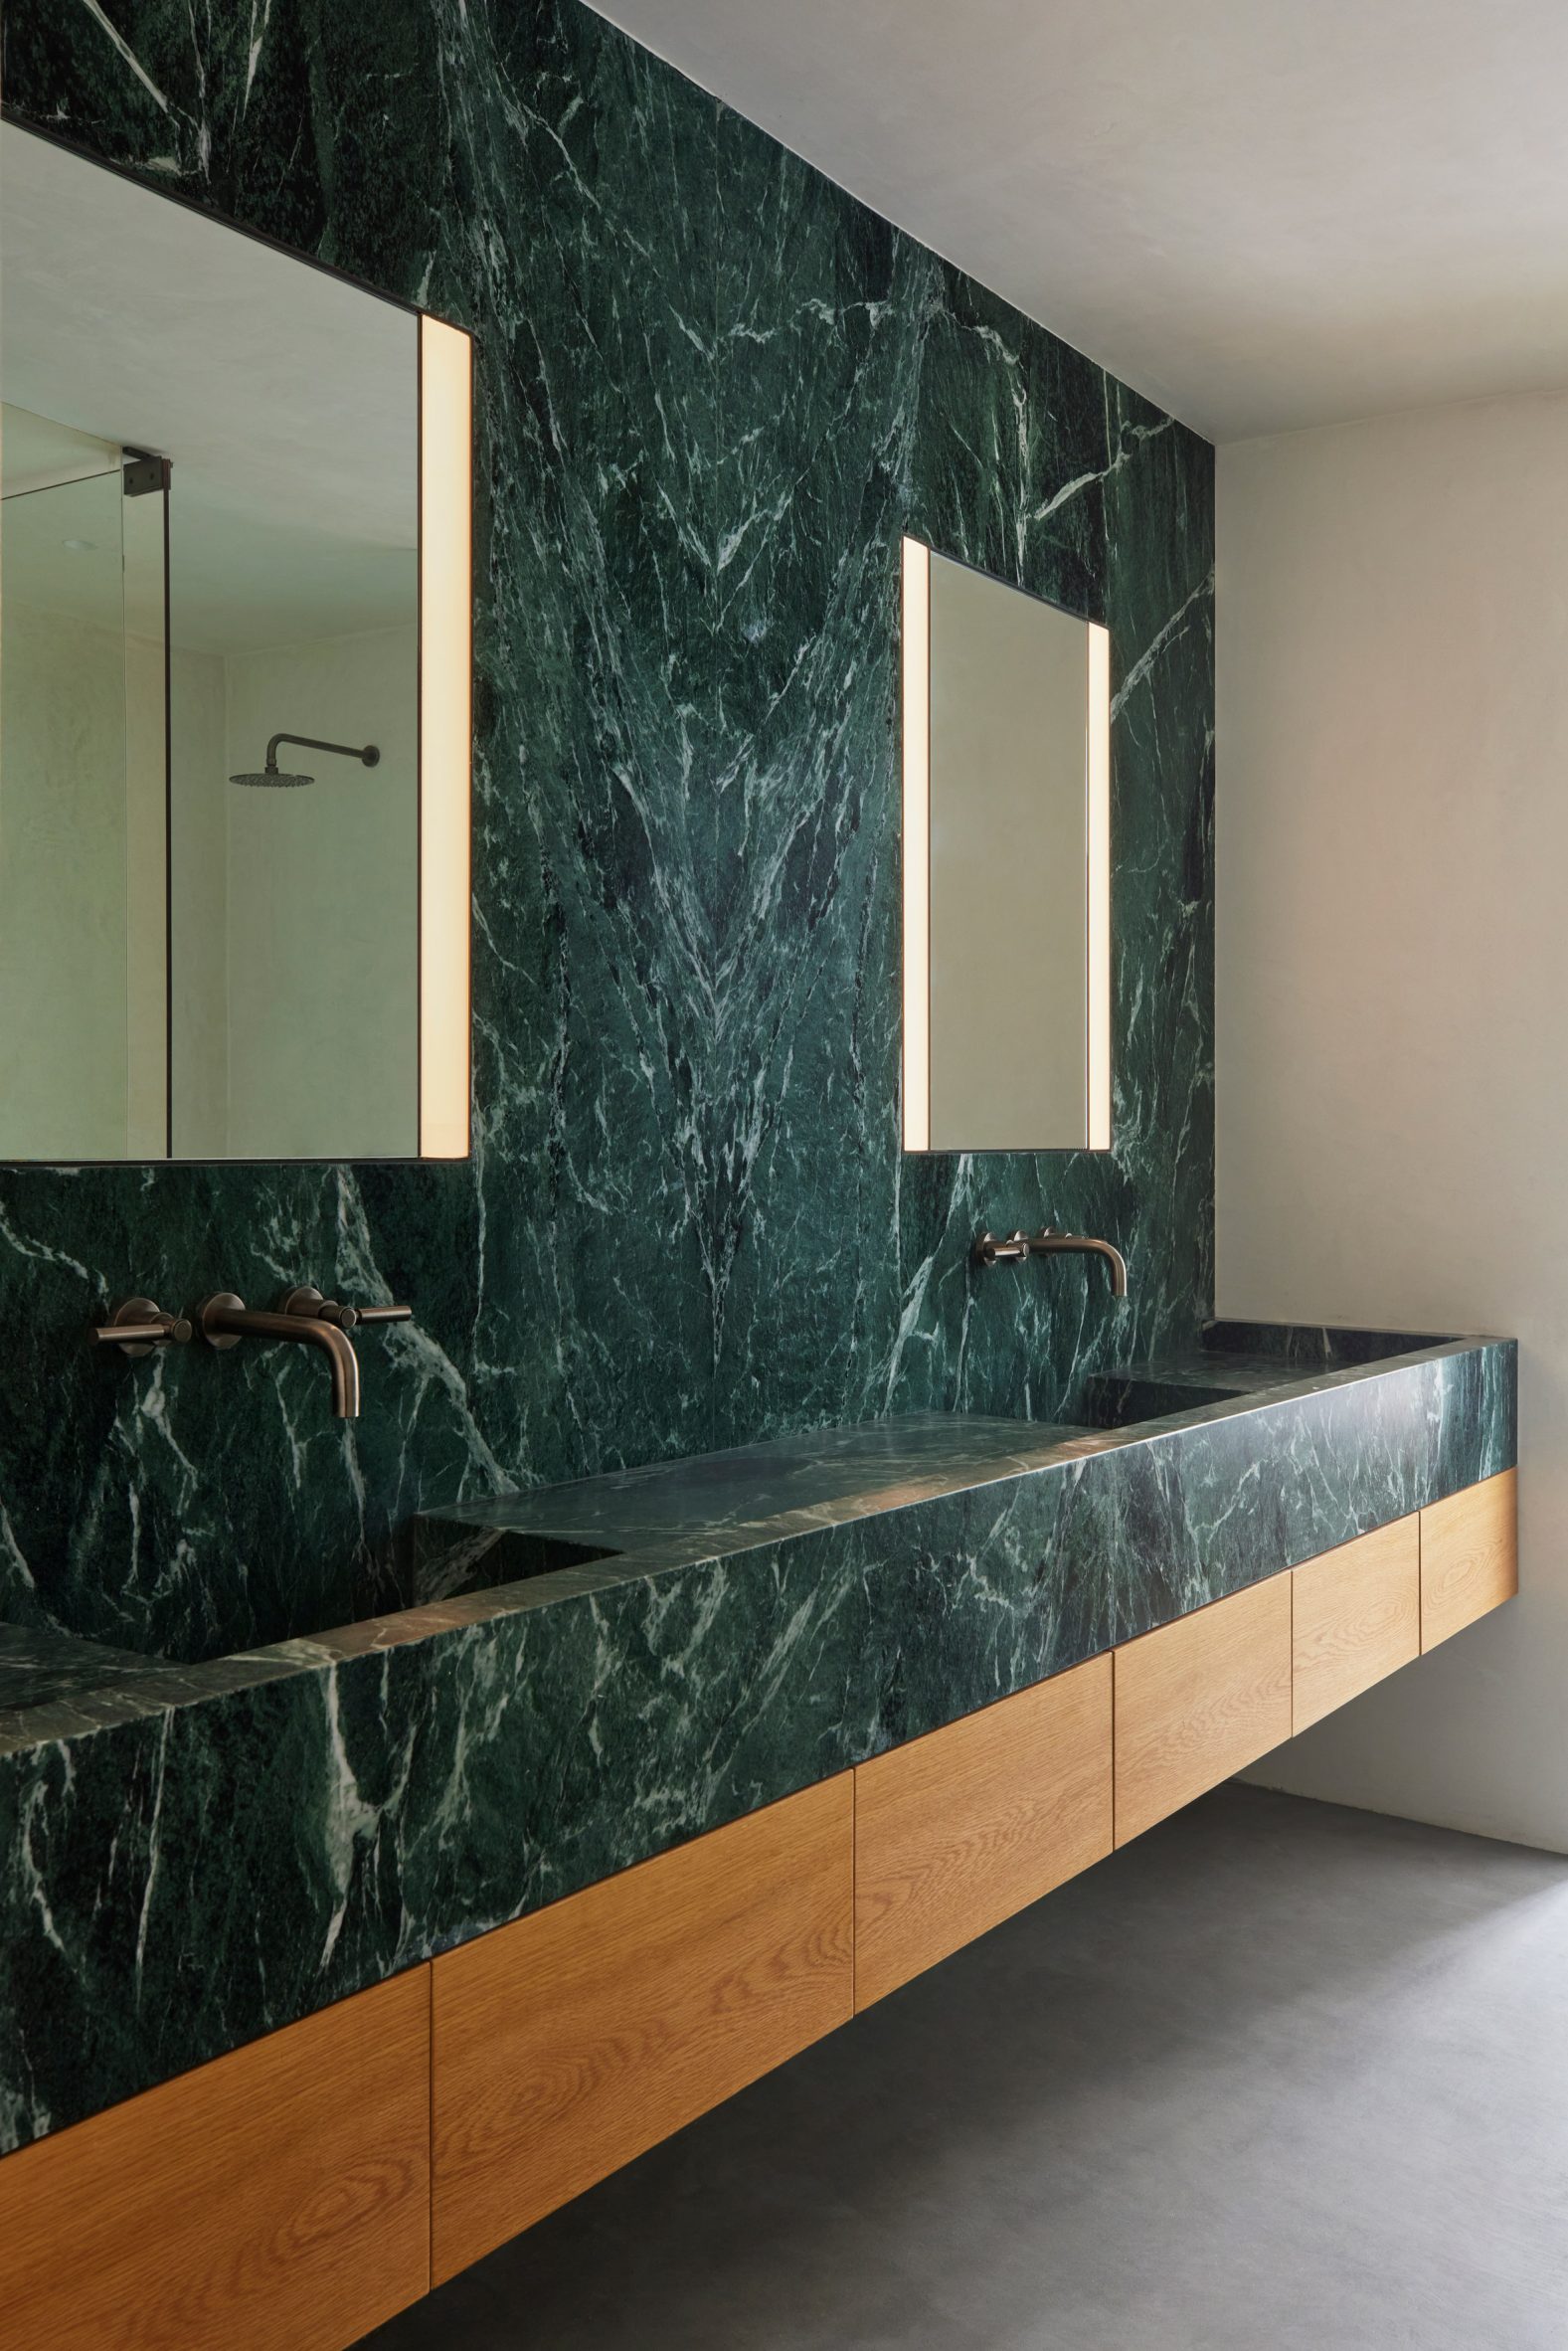 Bathroom lined with Verde Aver marble